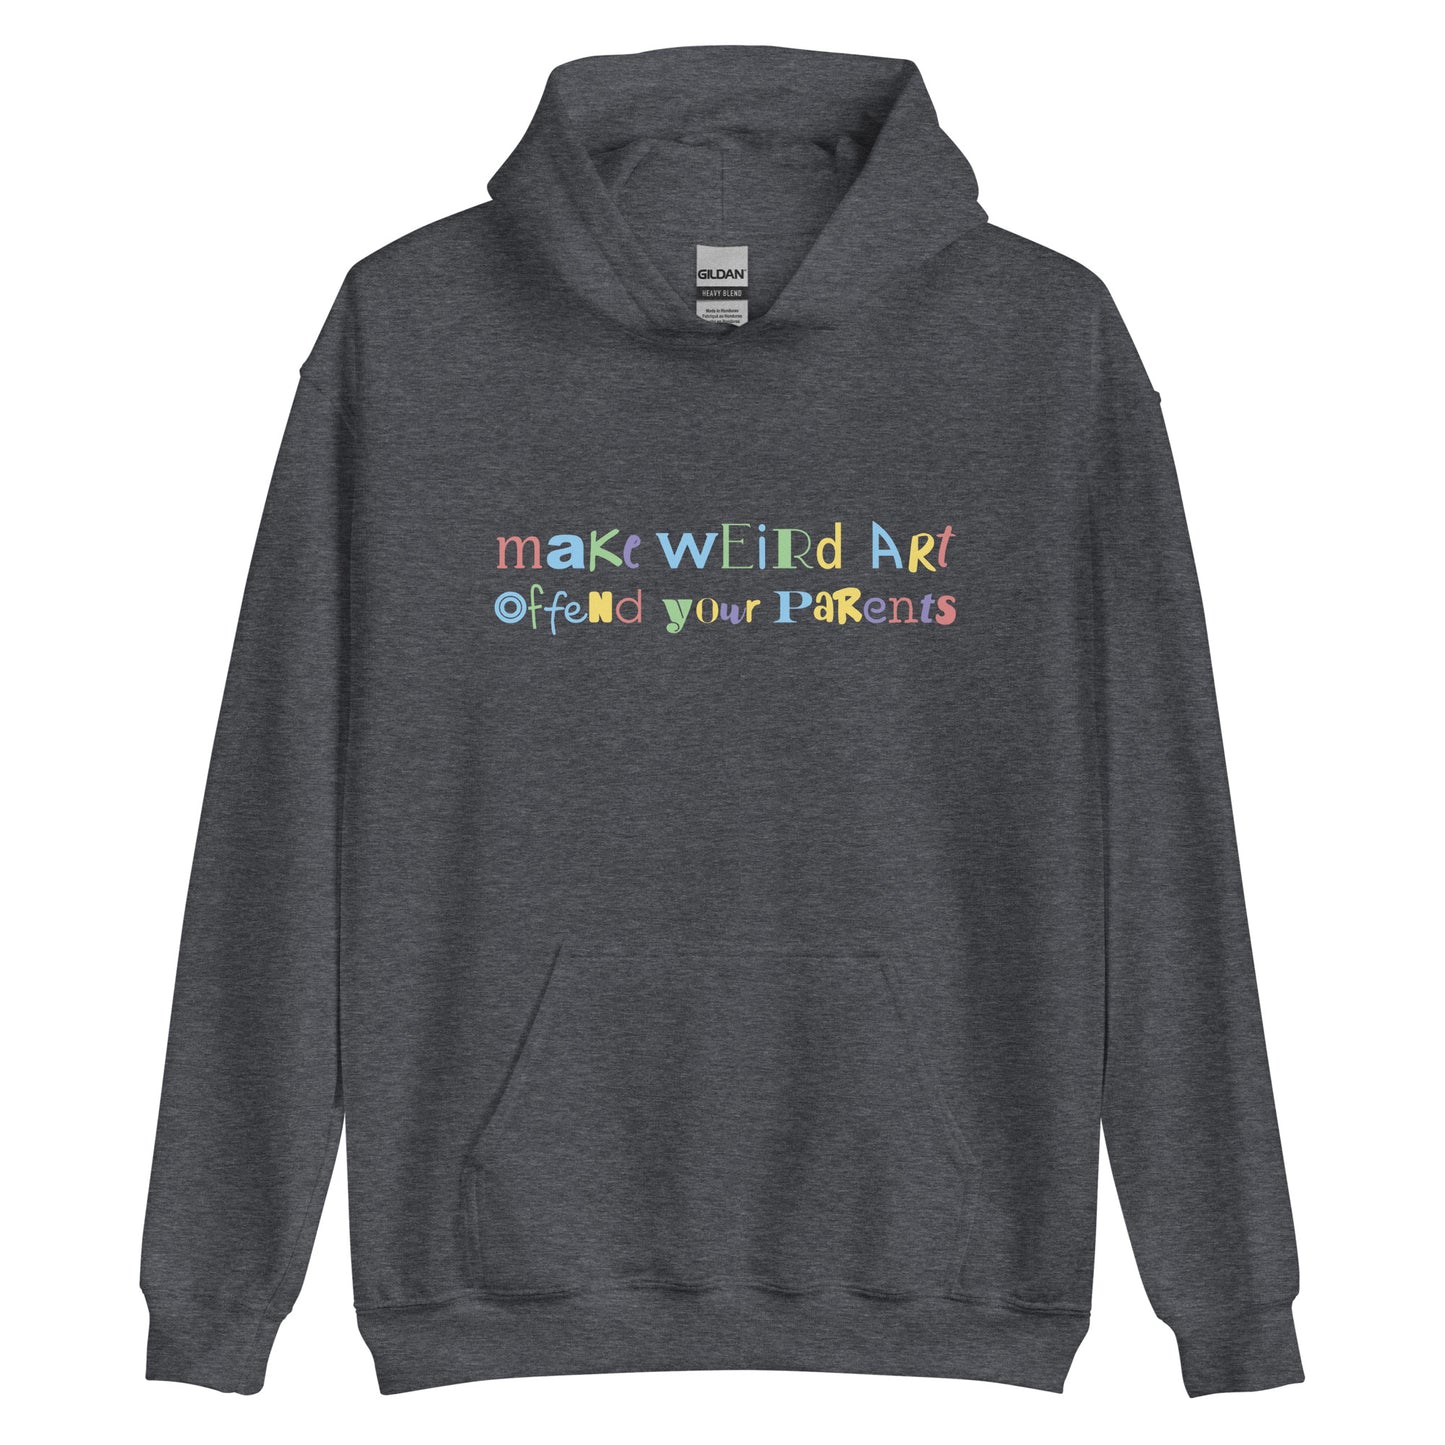 A dark grey hooded sweatshirt featuring text that reads "make weird art, offend your parents" in a mix of different font styles and colors